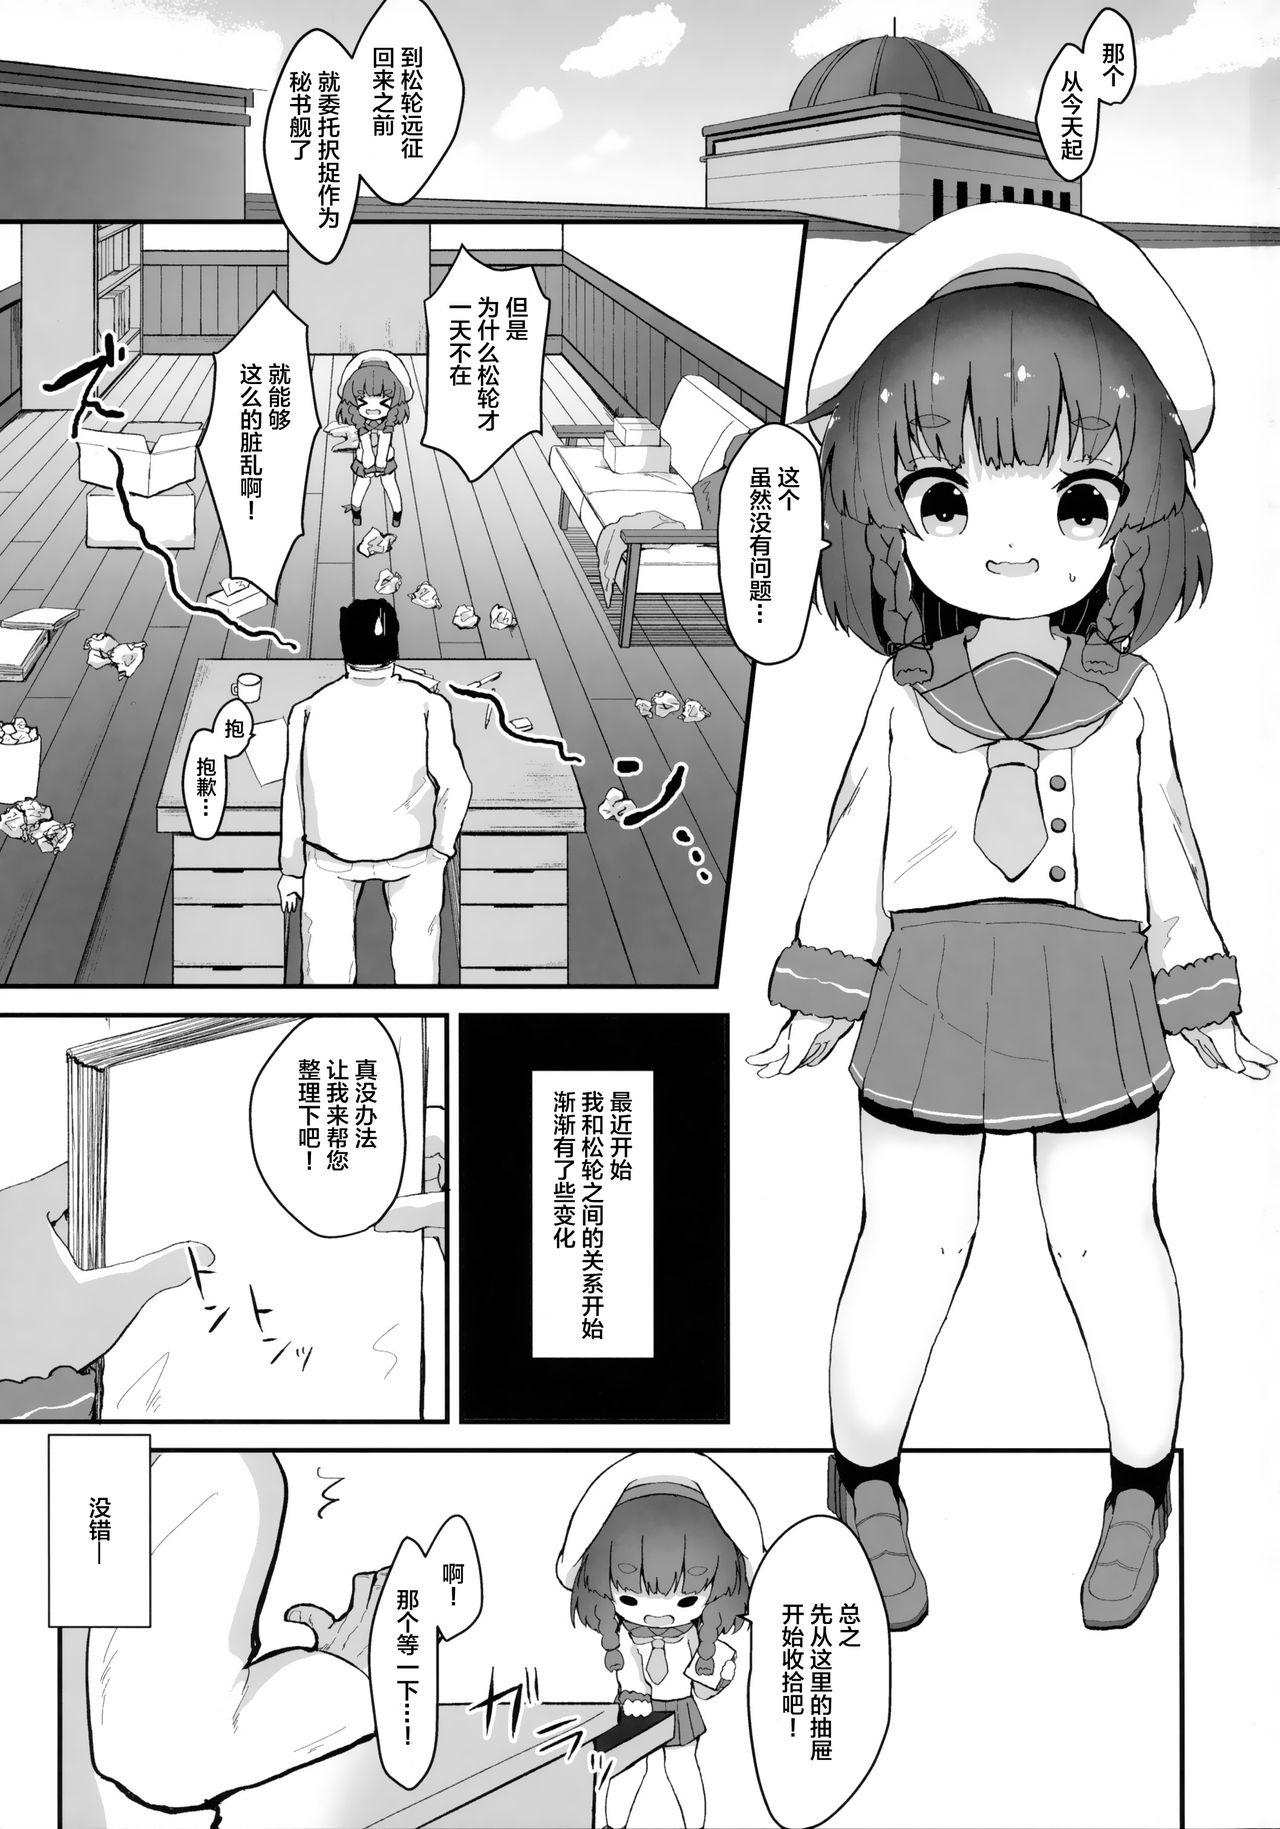 Consolo Ringo no Hanakotoba - Flower language of the APPLE - Kantai collection Licking Pussy - Page 3